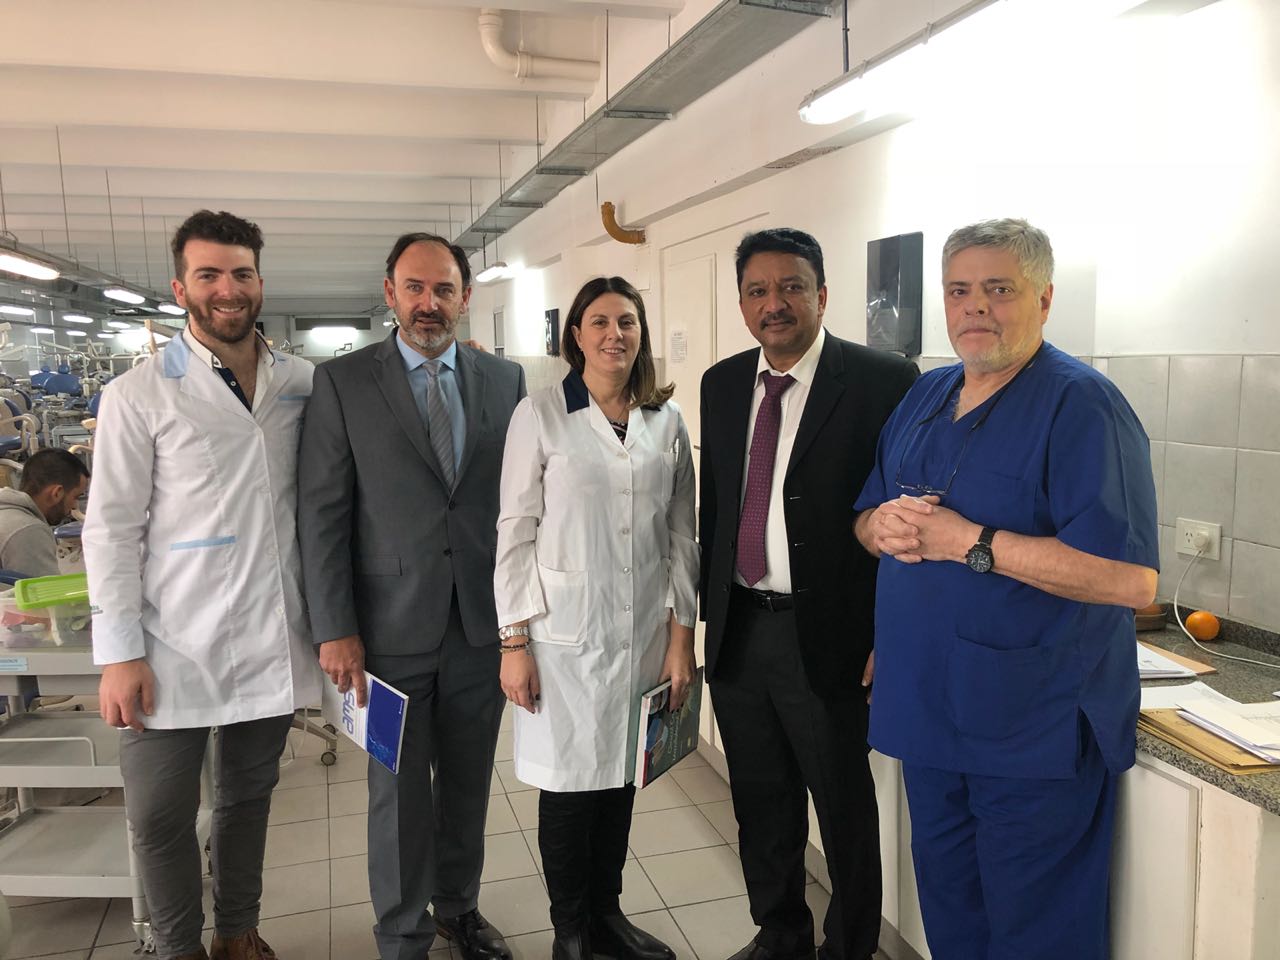 Dr Sm Balaji With Prof Sergio Gotta, Dr Maricel Marini And Residents Of The Department Of Oral And Maxillofacial Surgery